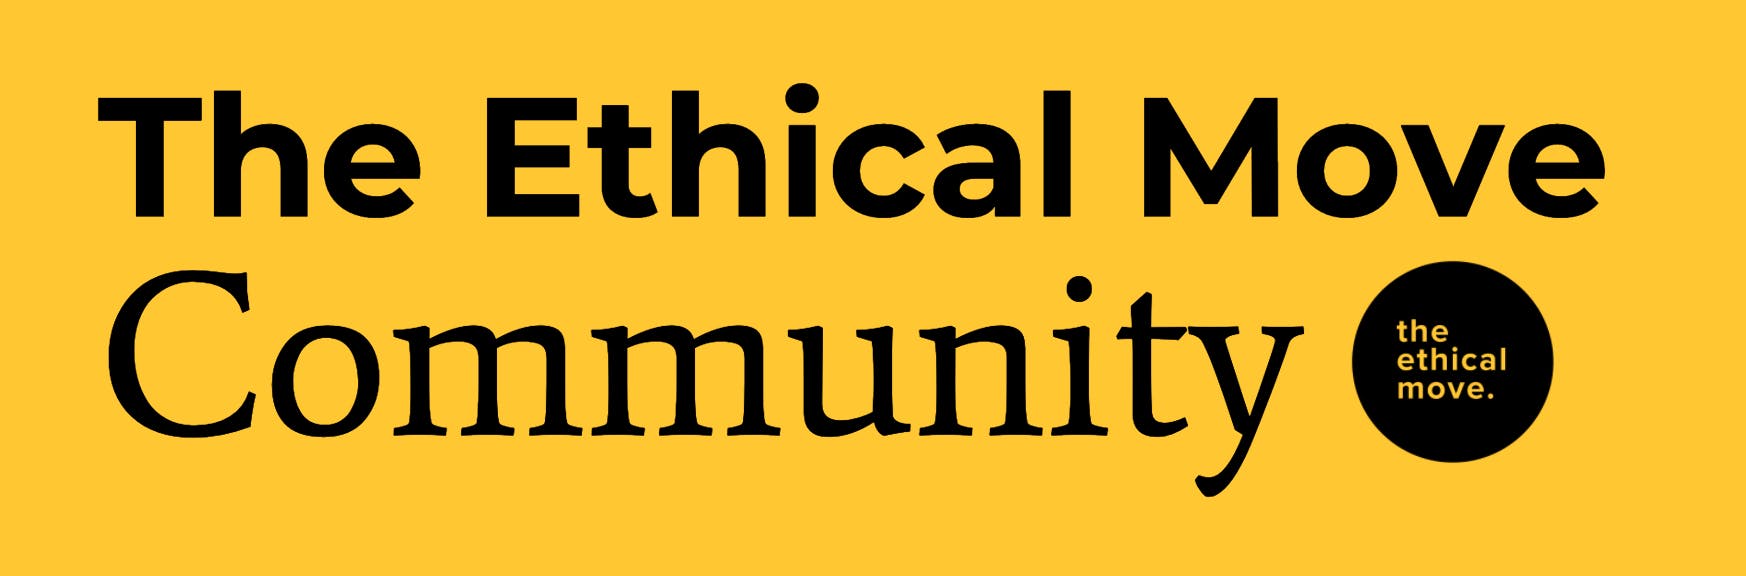 'The Ethical Move Community' on yellow background with black tem logo